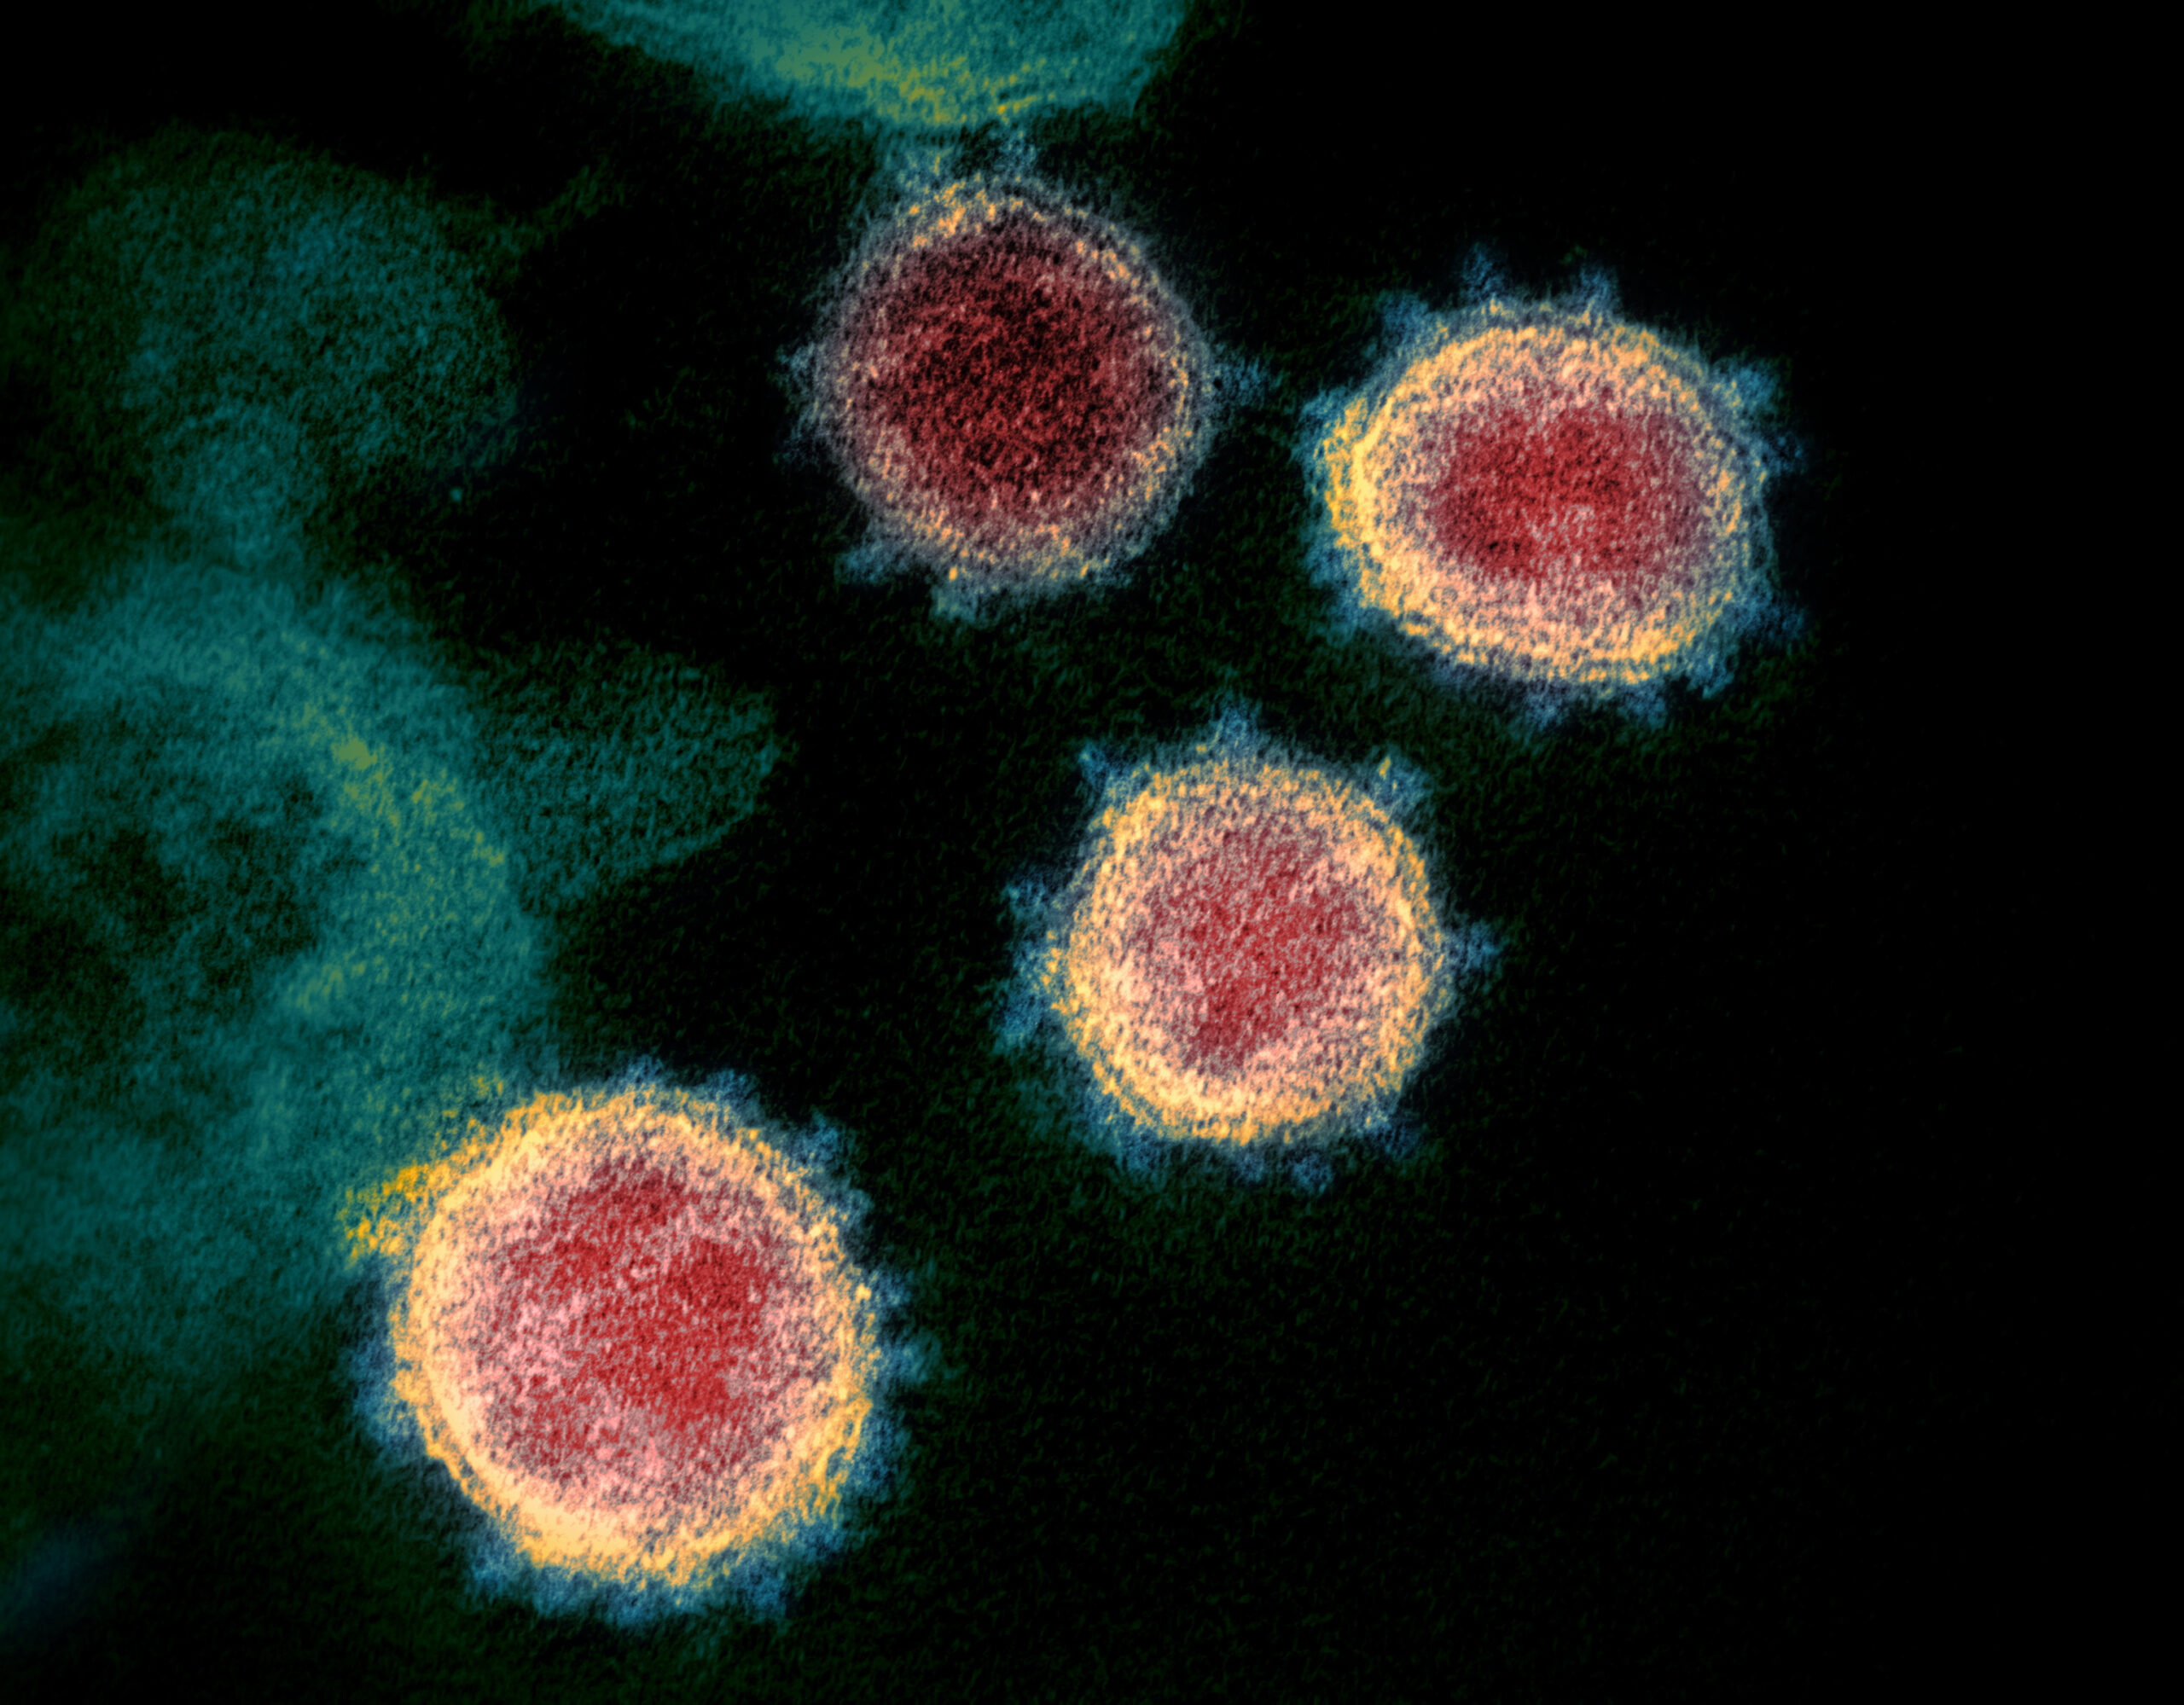 Four pink circles -- the novel coronavirus -- rest on a blue-green background in this microscope image.